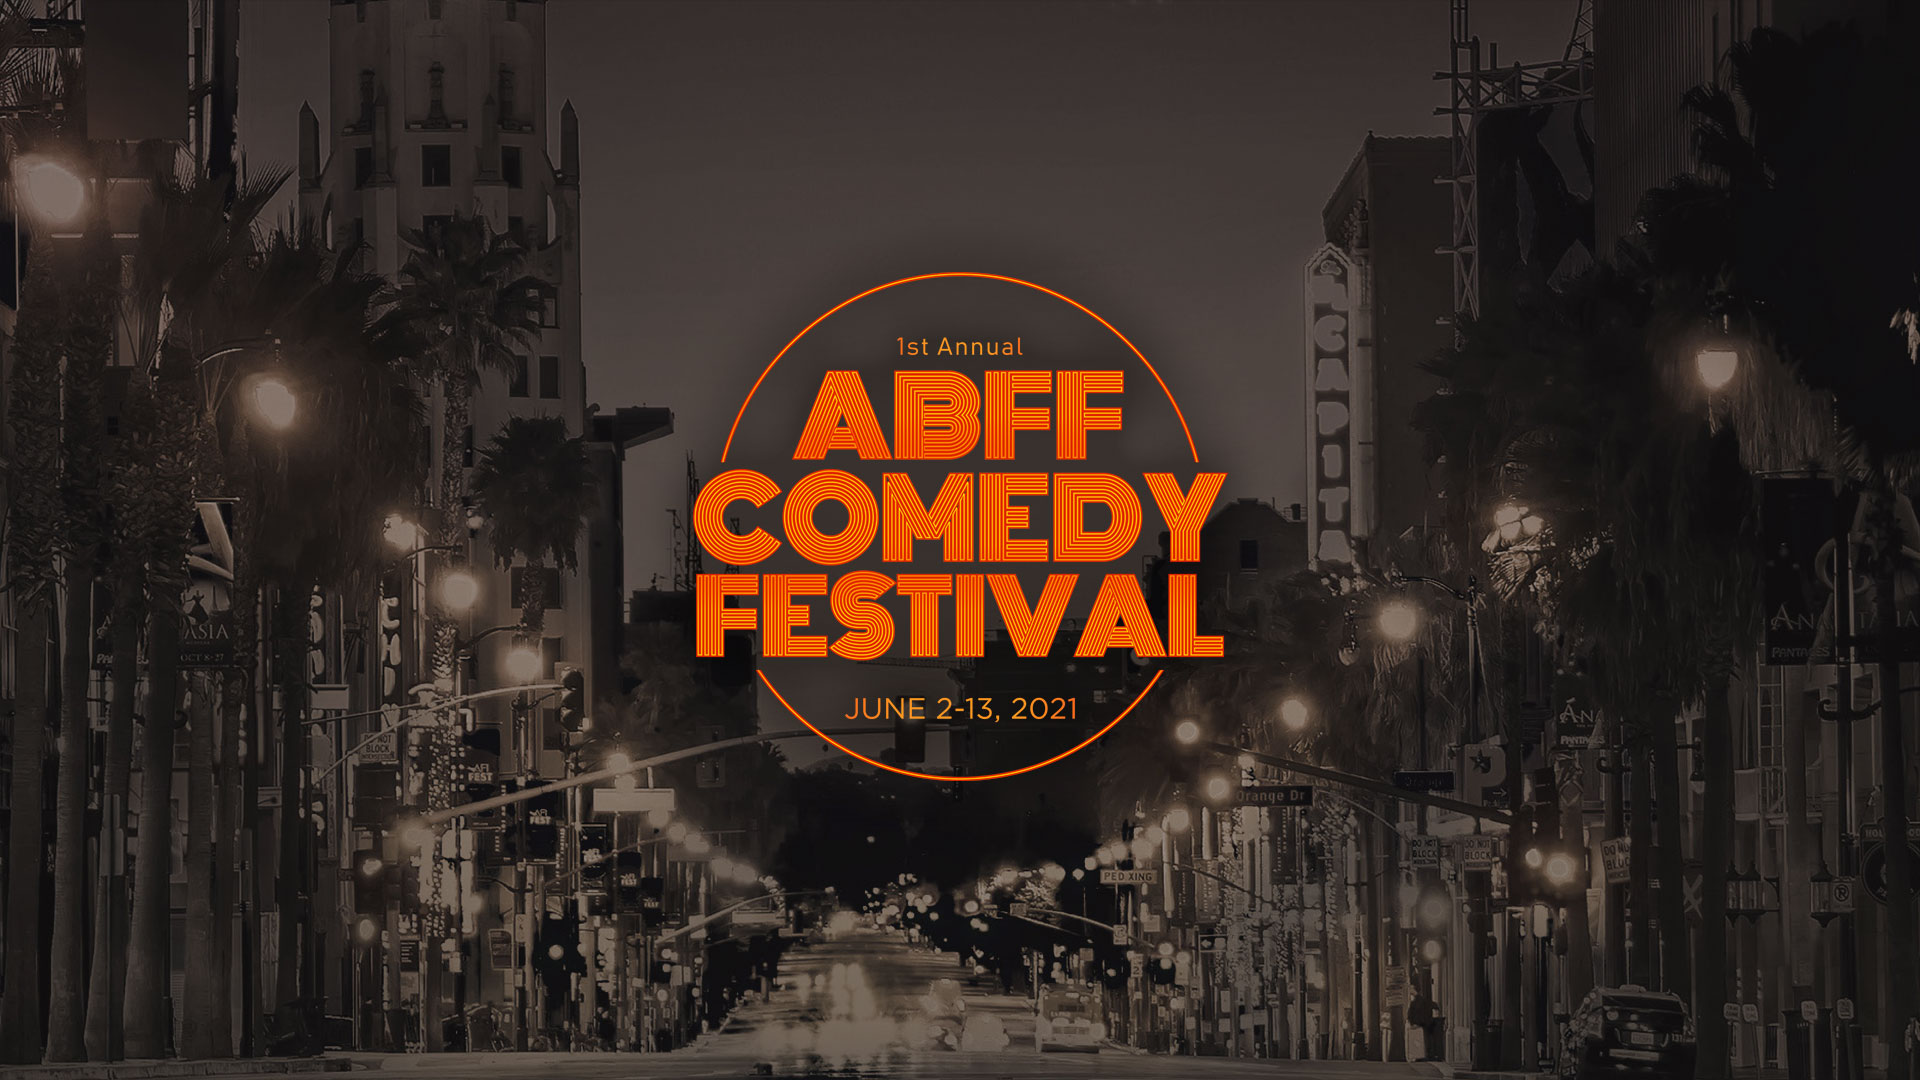 ABFF Comedy Festival Showcasing Black & Brown Comedians & Writers